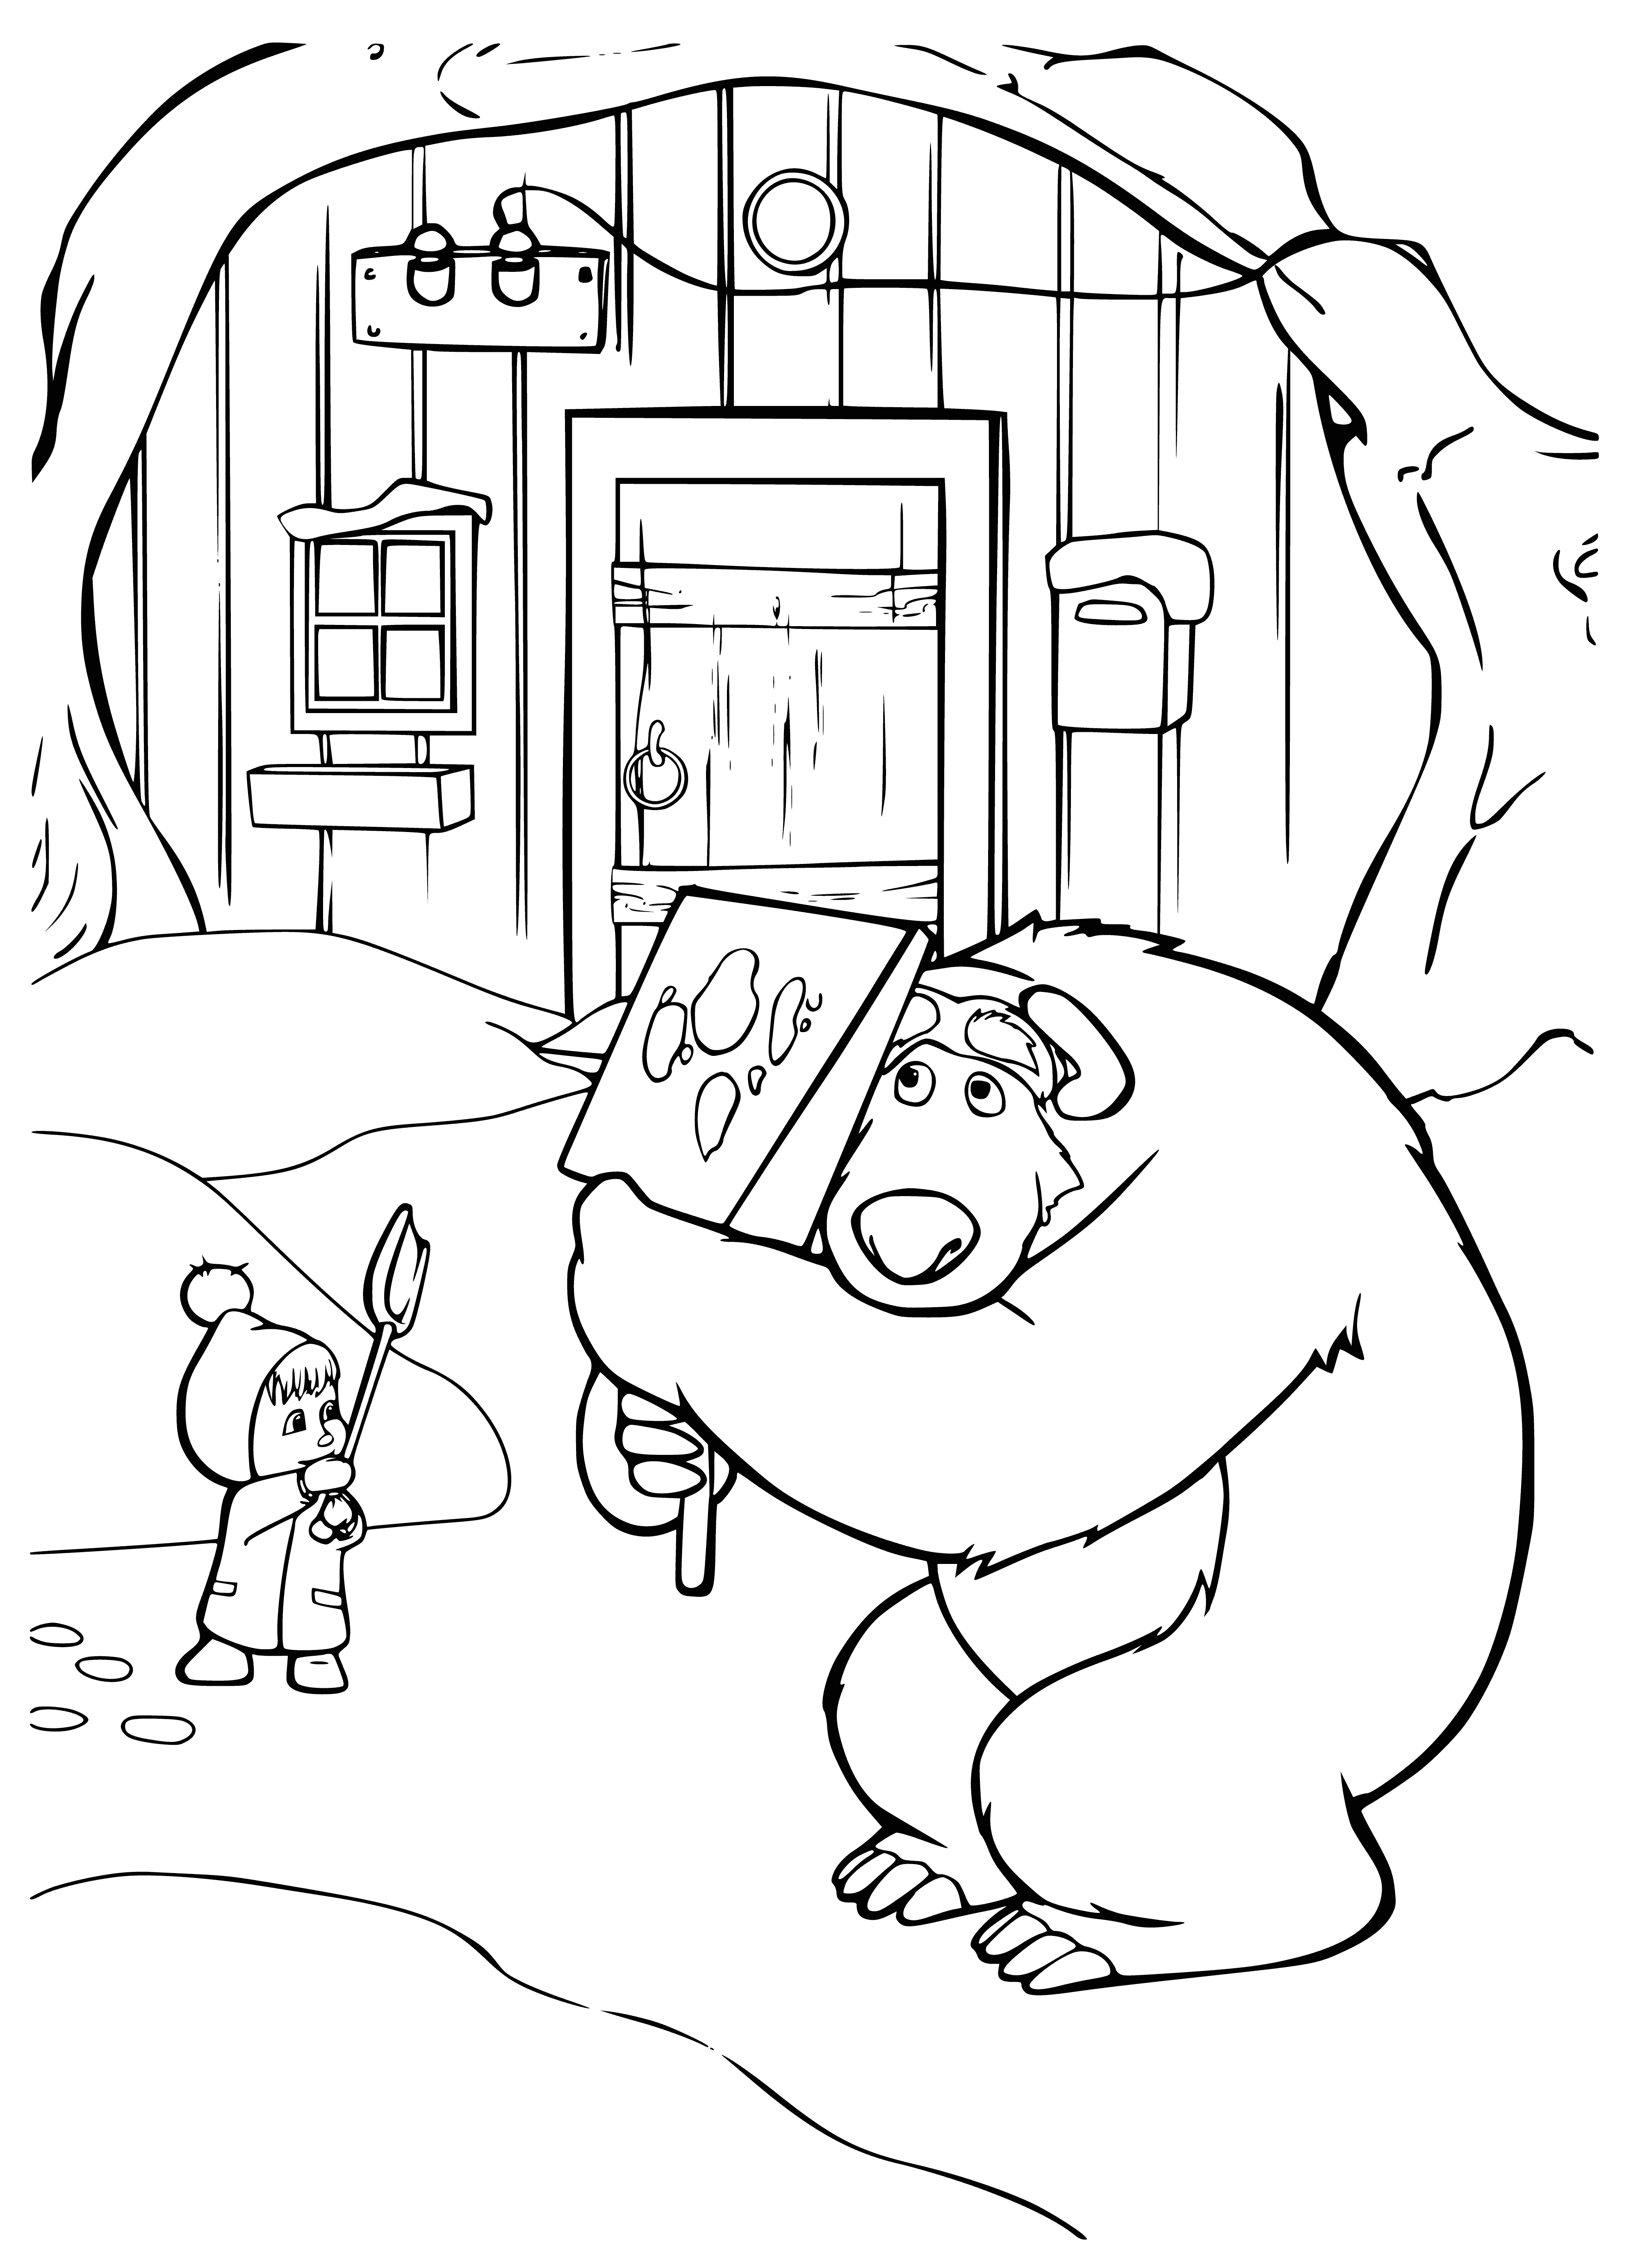 coloring page: Masha stands tall before a large bear atop its hind legs, looking with its large head and long snout.